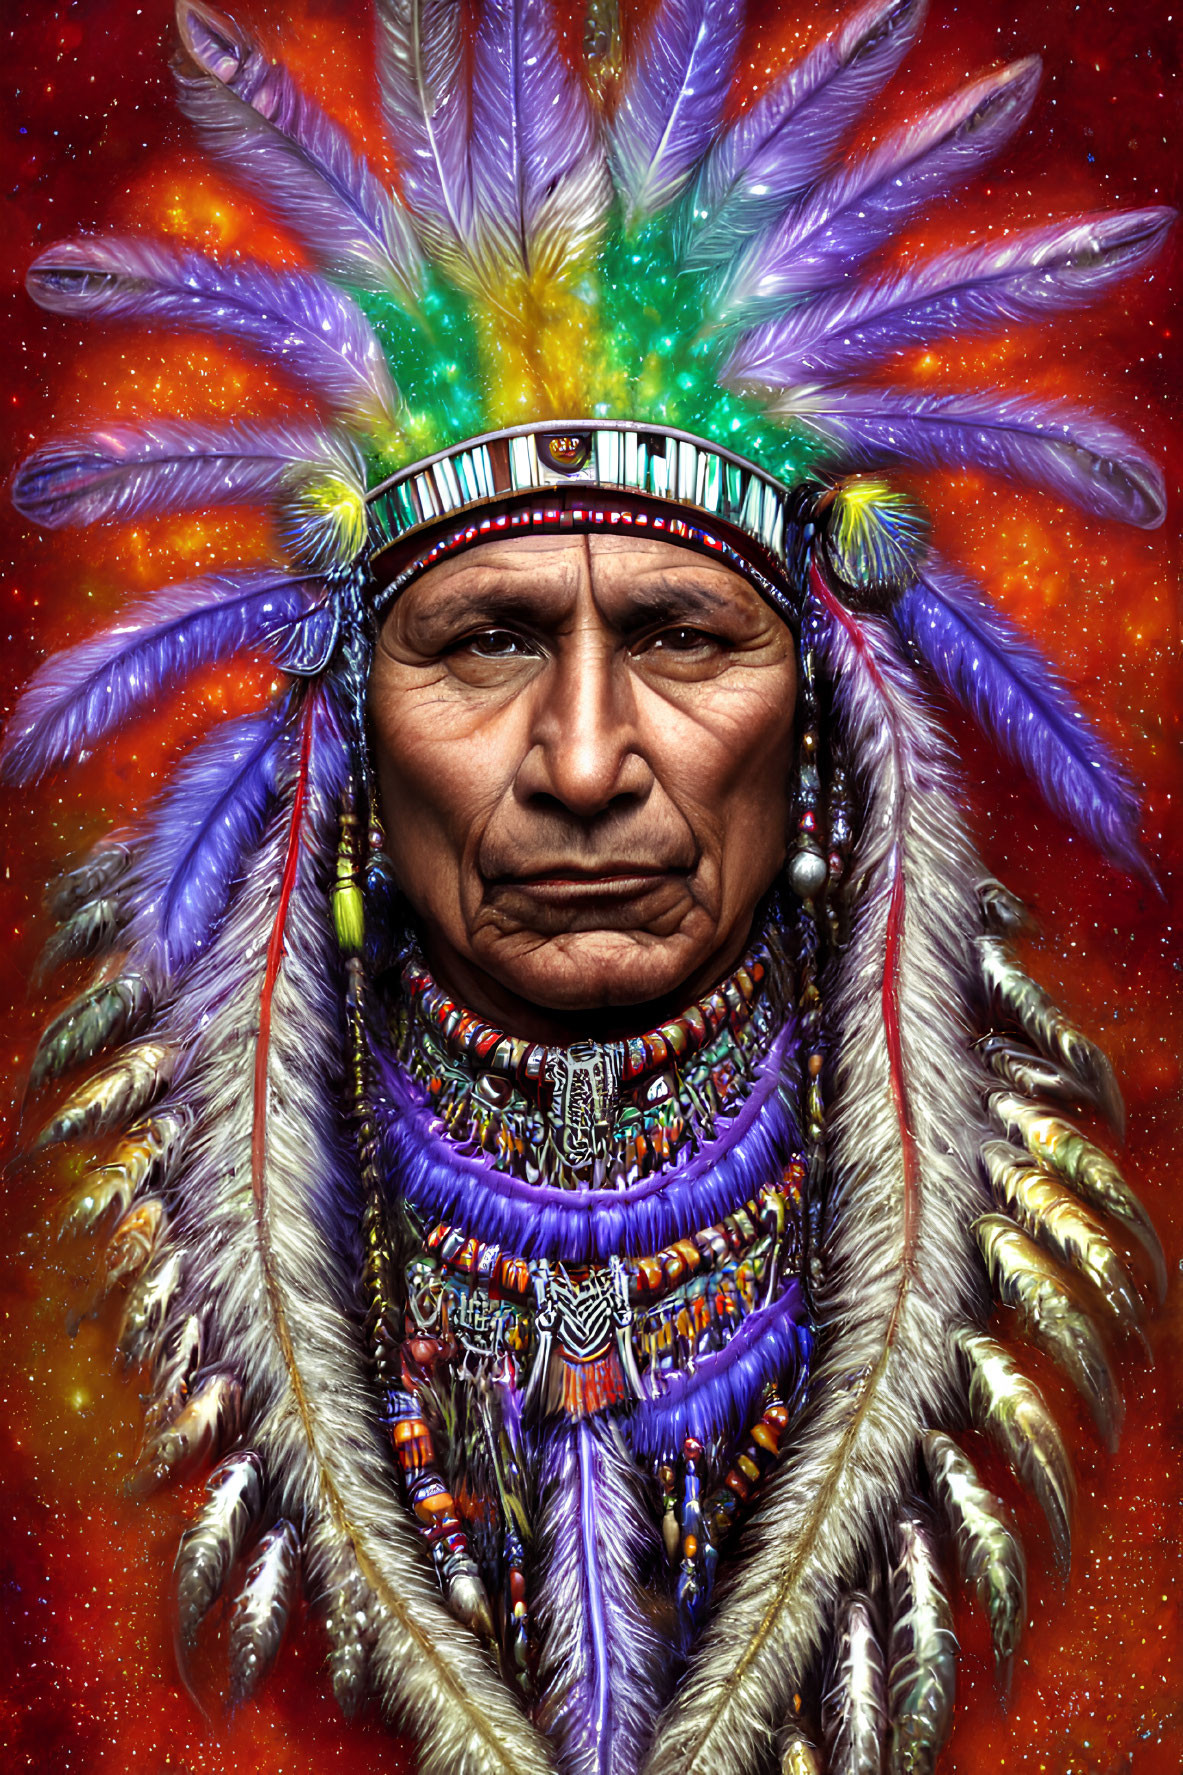 Colorful Native American headdress on stern-faced man against starry backdrop